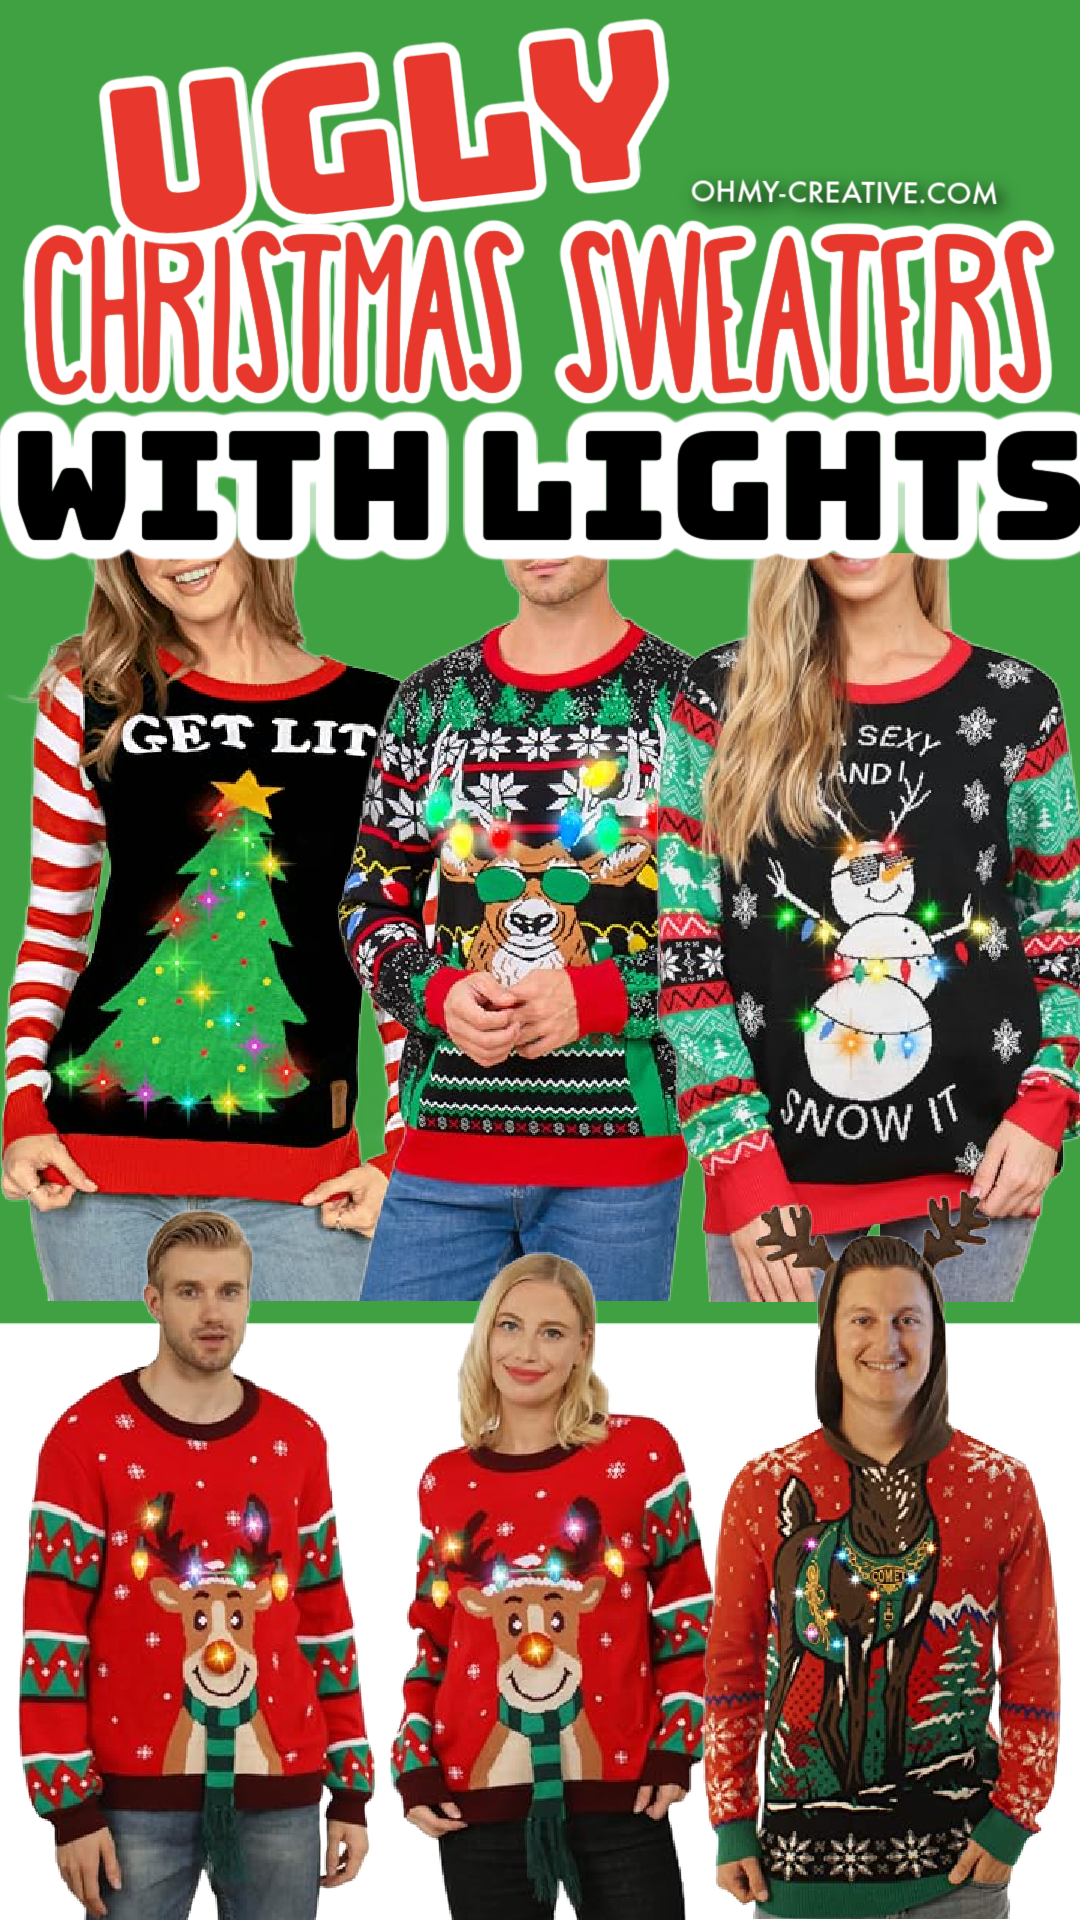 A collage of Ugly Christmas sweaters for men and women with lights that light up!